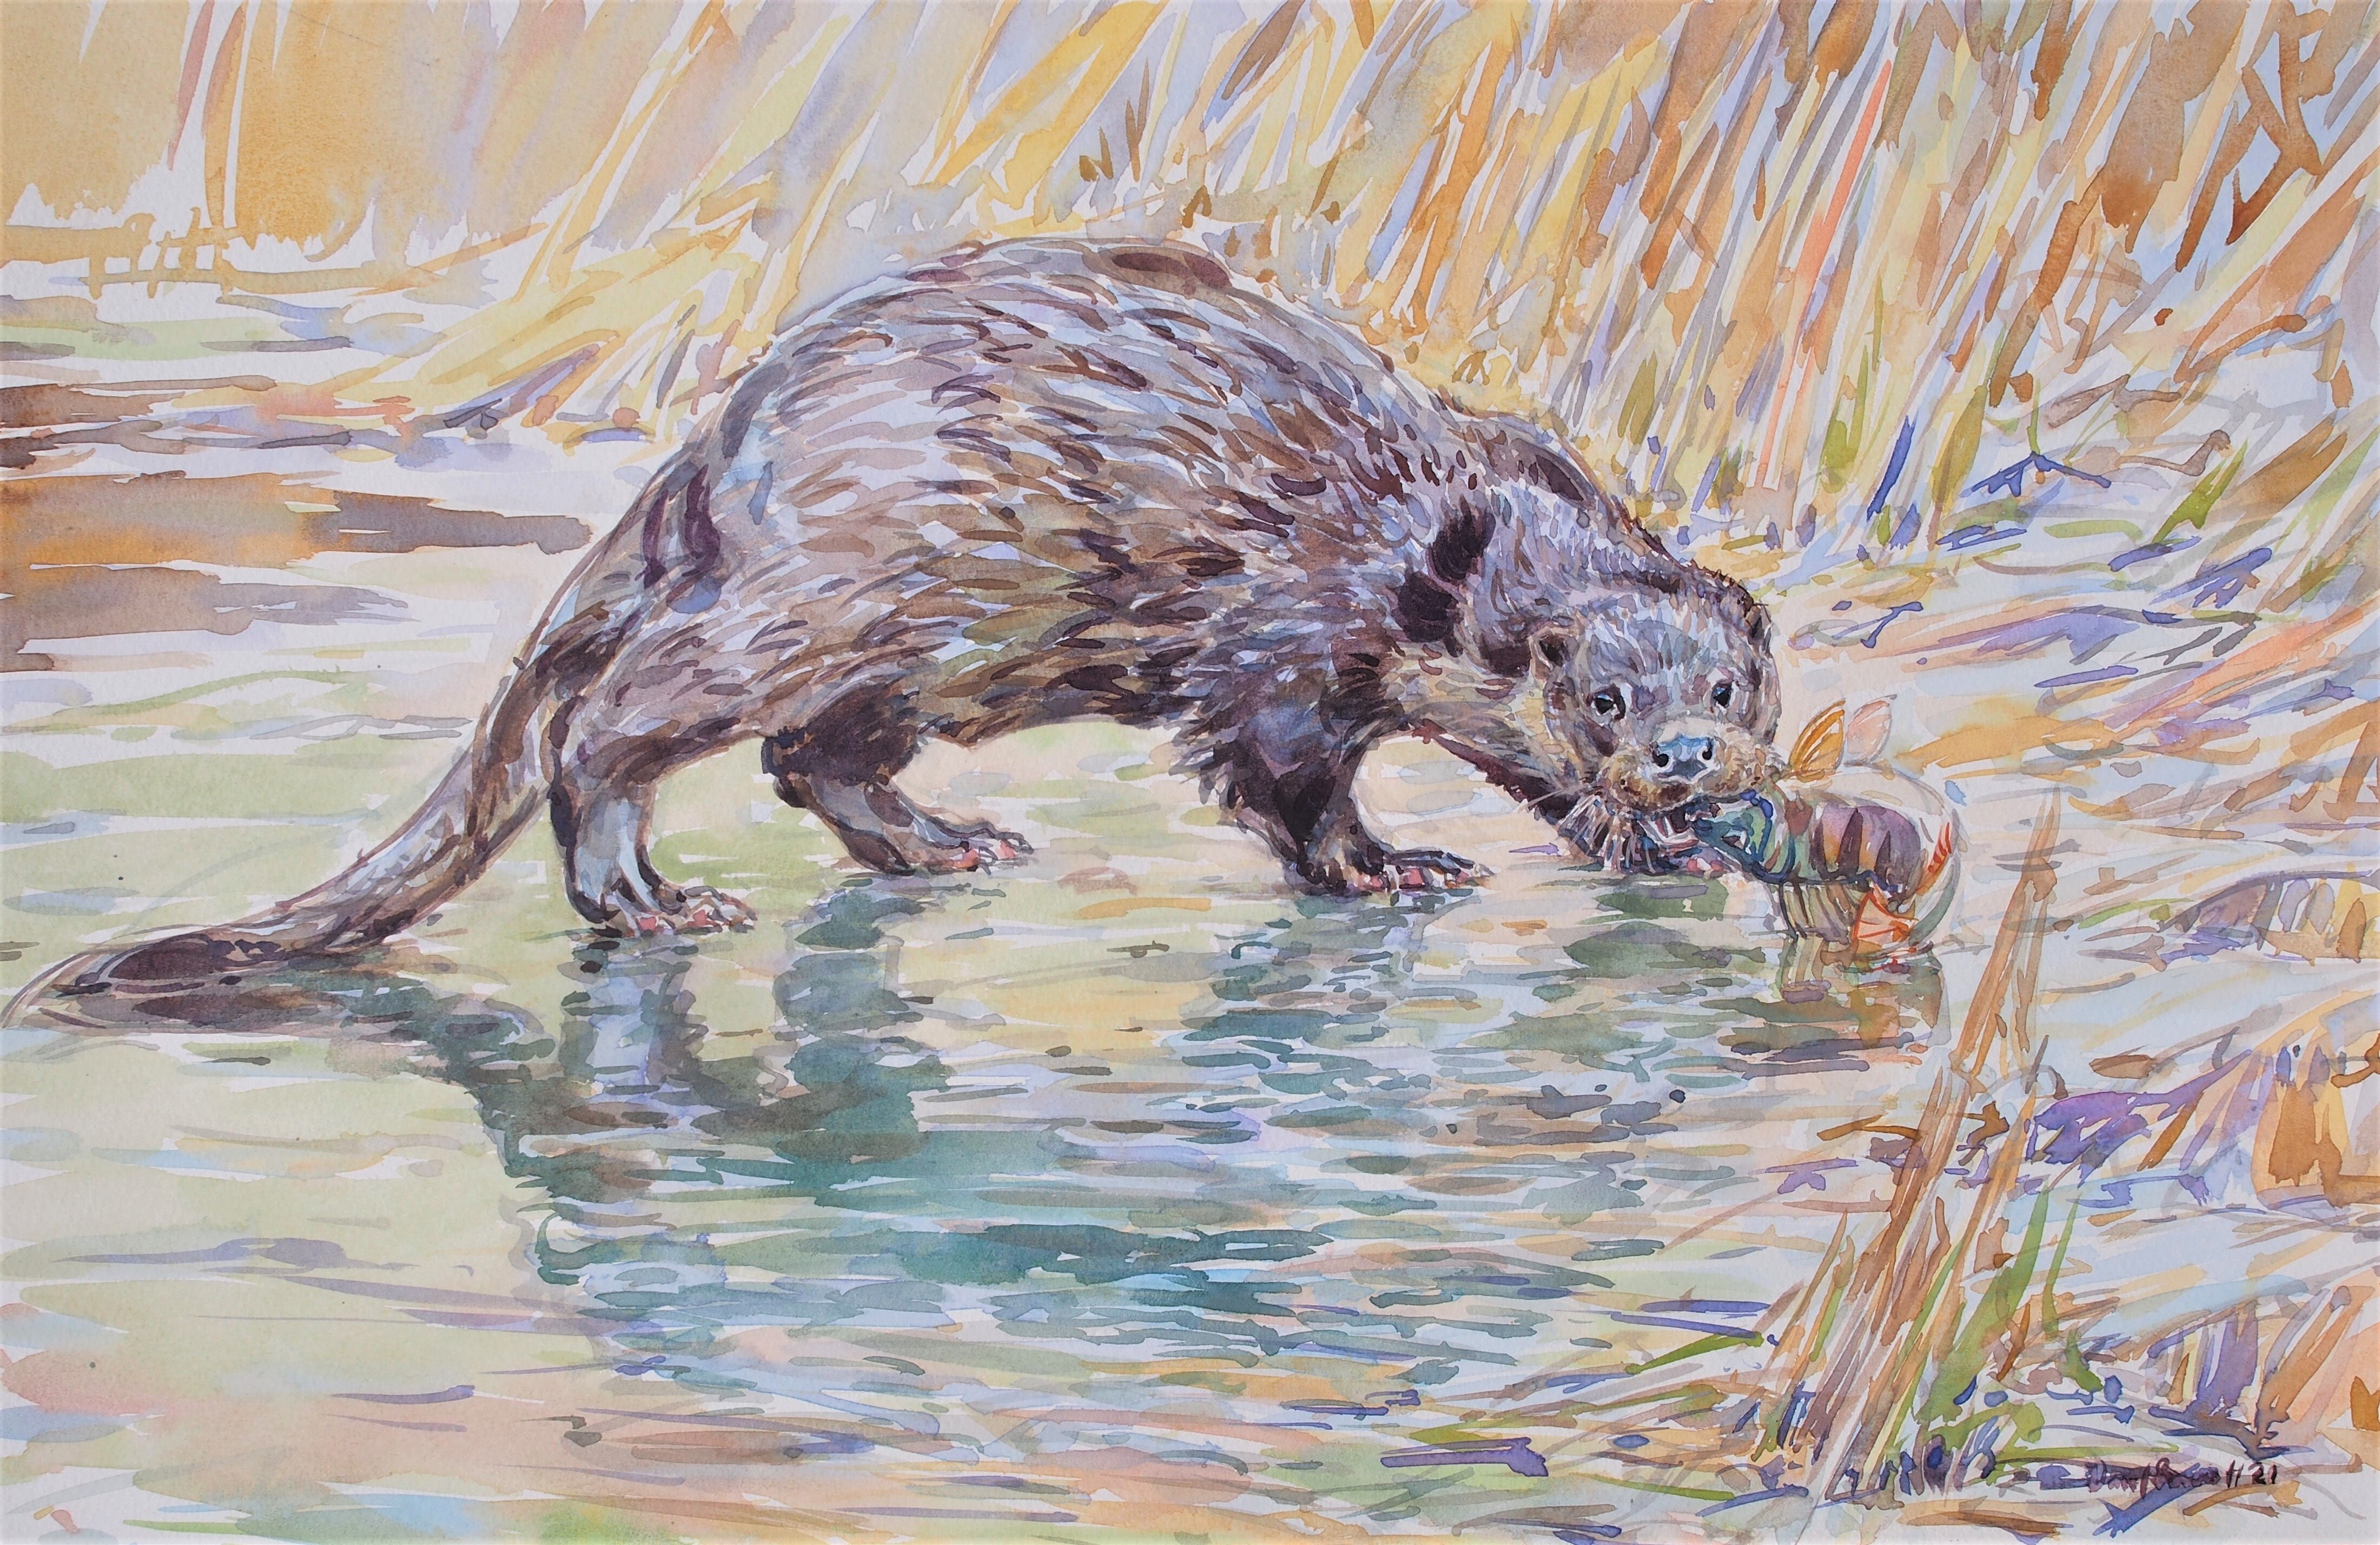 <p>Otter and Perch by David Bennett</p>